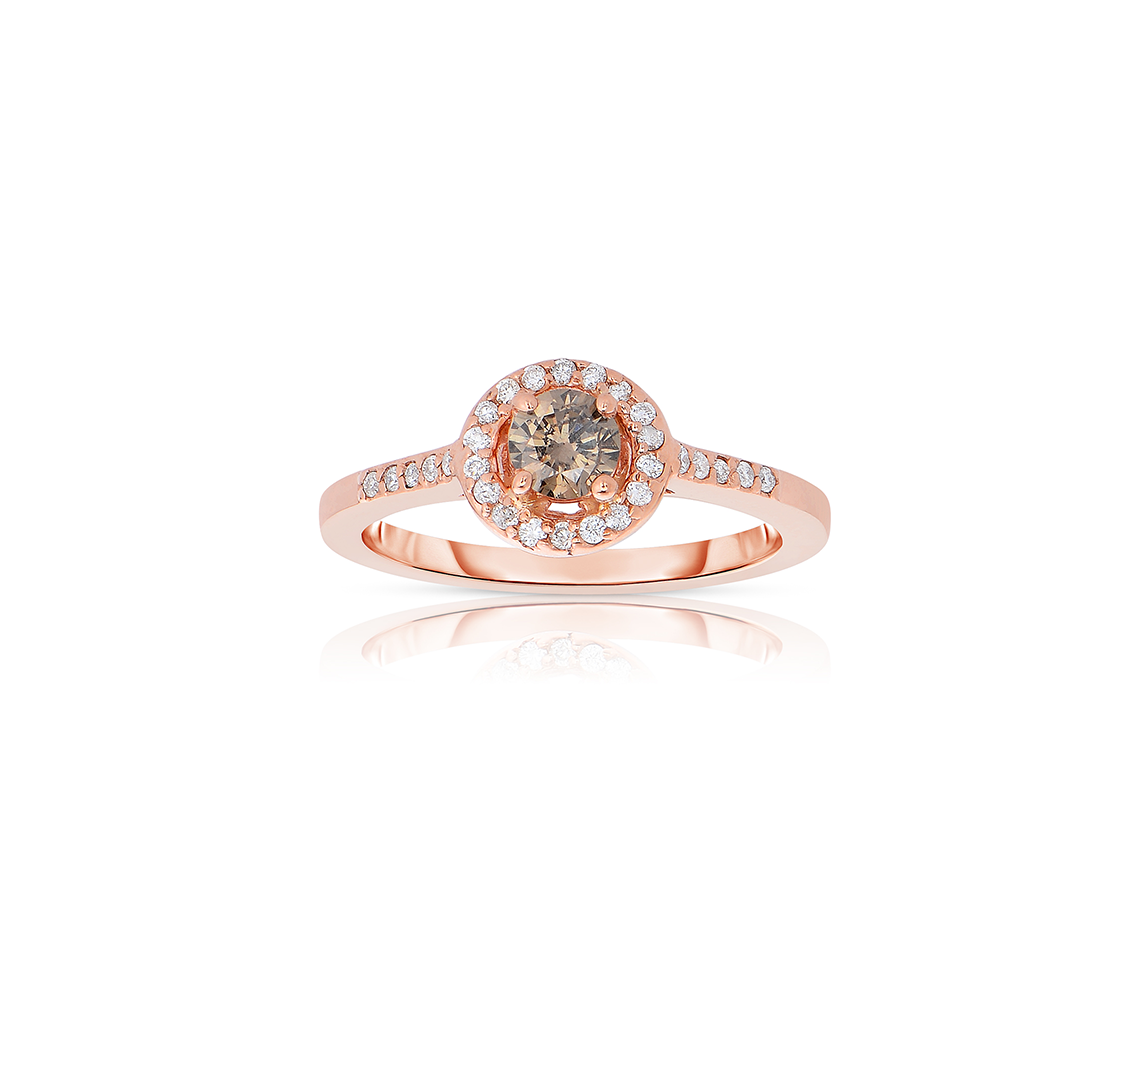 Sabel Collection 14K Rose Gold Round Fancy Diamond Ring with White Diamond Halo